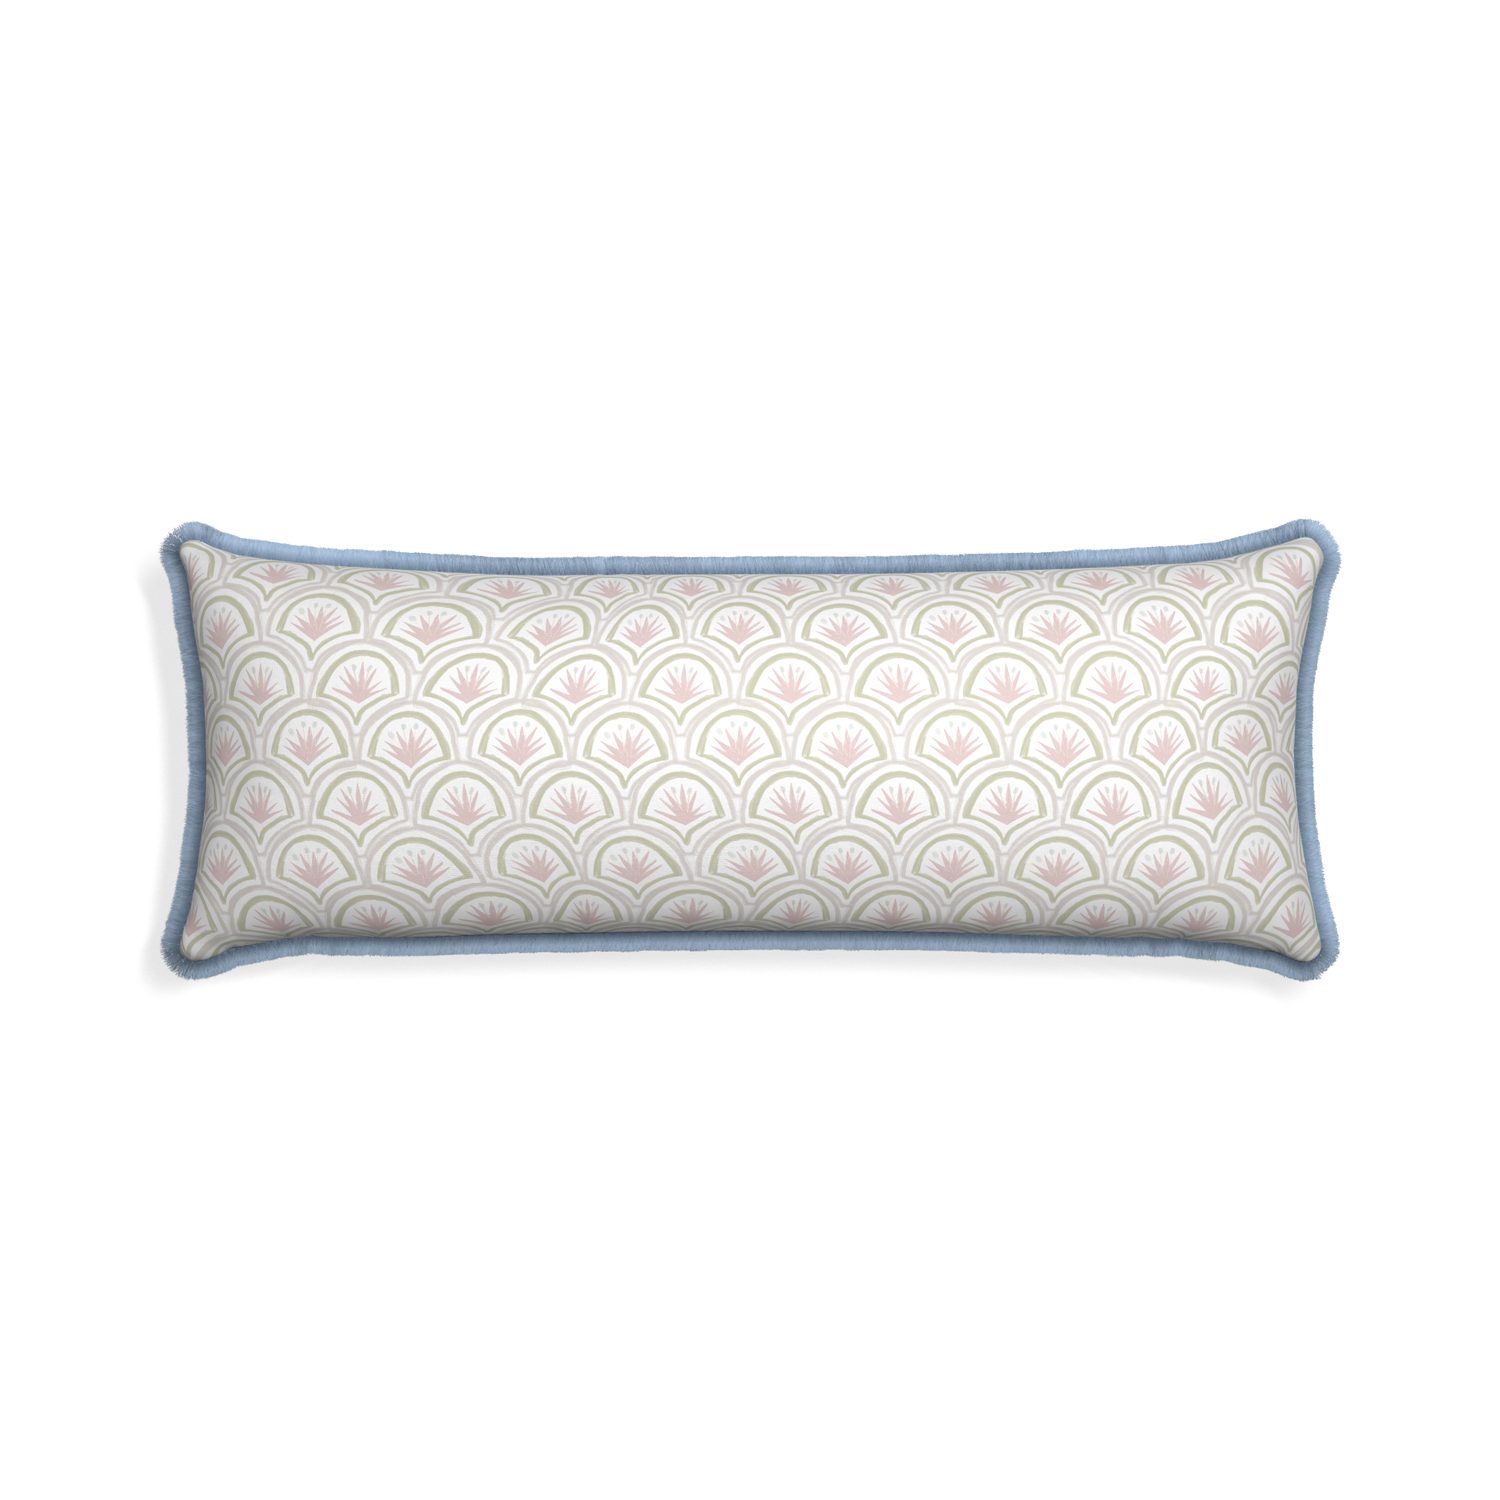 Xl-lumbar thatcher rose custom pillow with sky fringe on white background